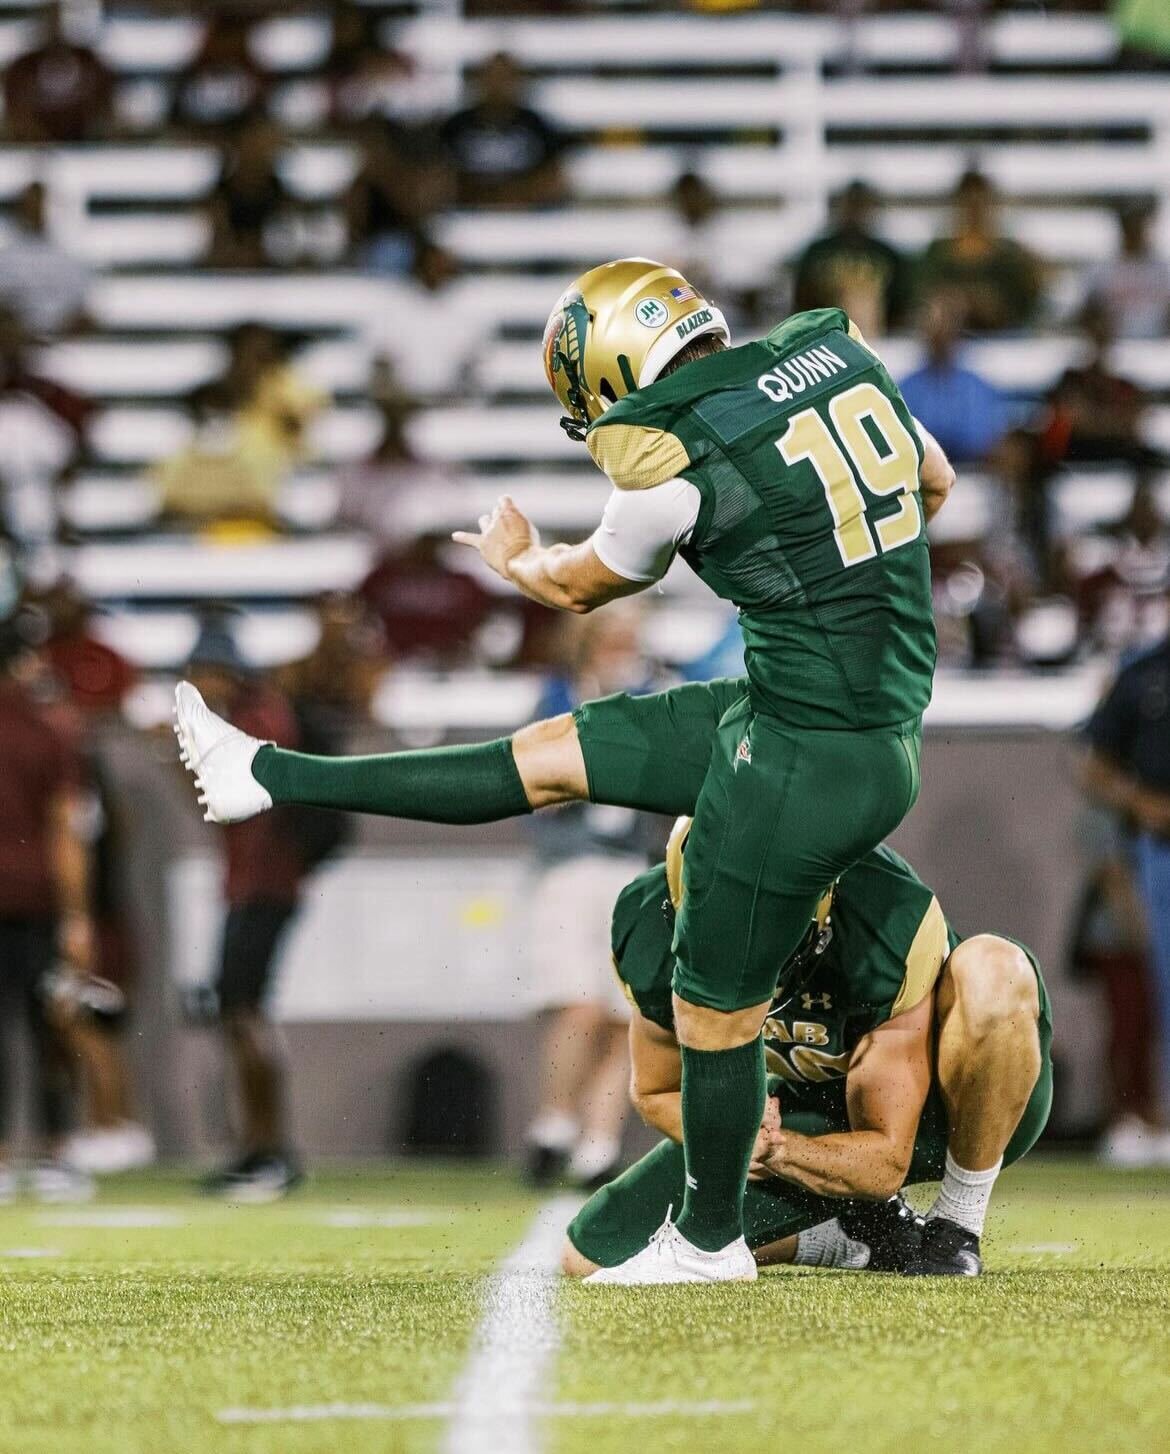 The UAB Blazers’ all-time PAT percentage leader is Matt Quinn who has connected on 36-of-47 field goals for a .984 mark with still one season remaining. Quinn was perfect on his field-goal attempts between 30-39 yards as a redshirt junior.